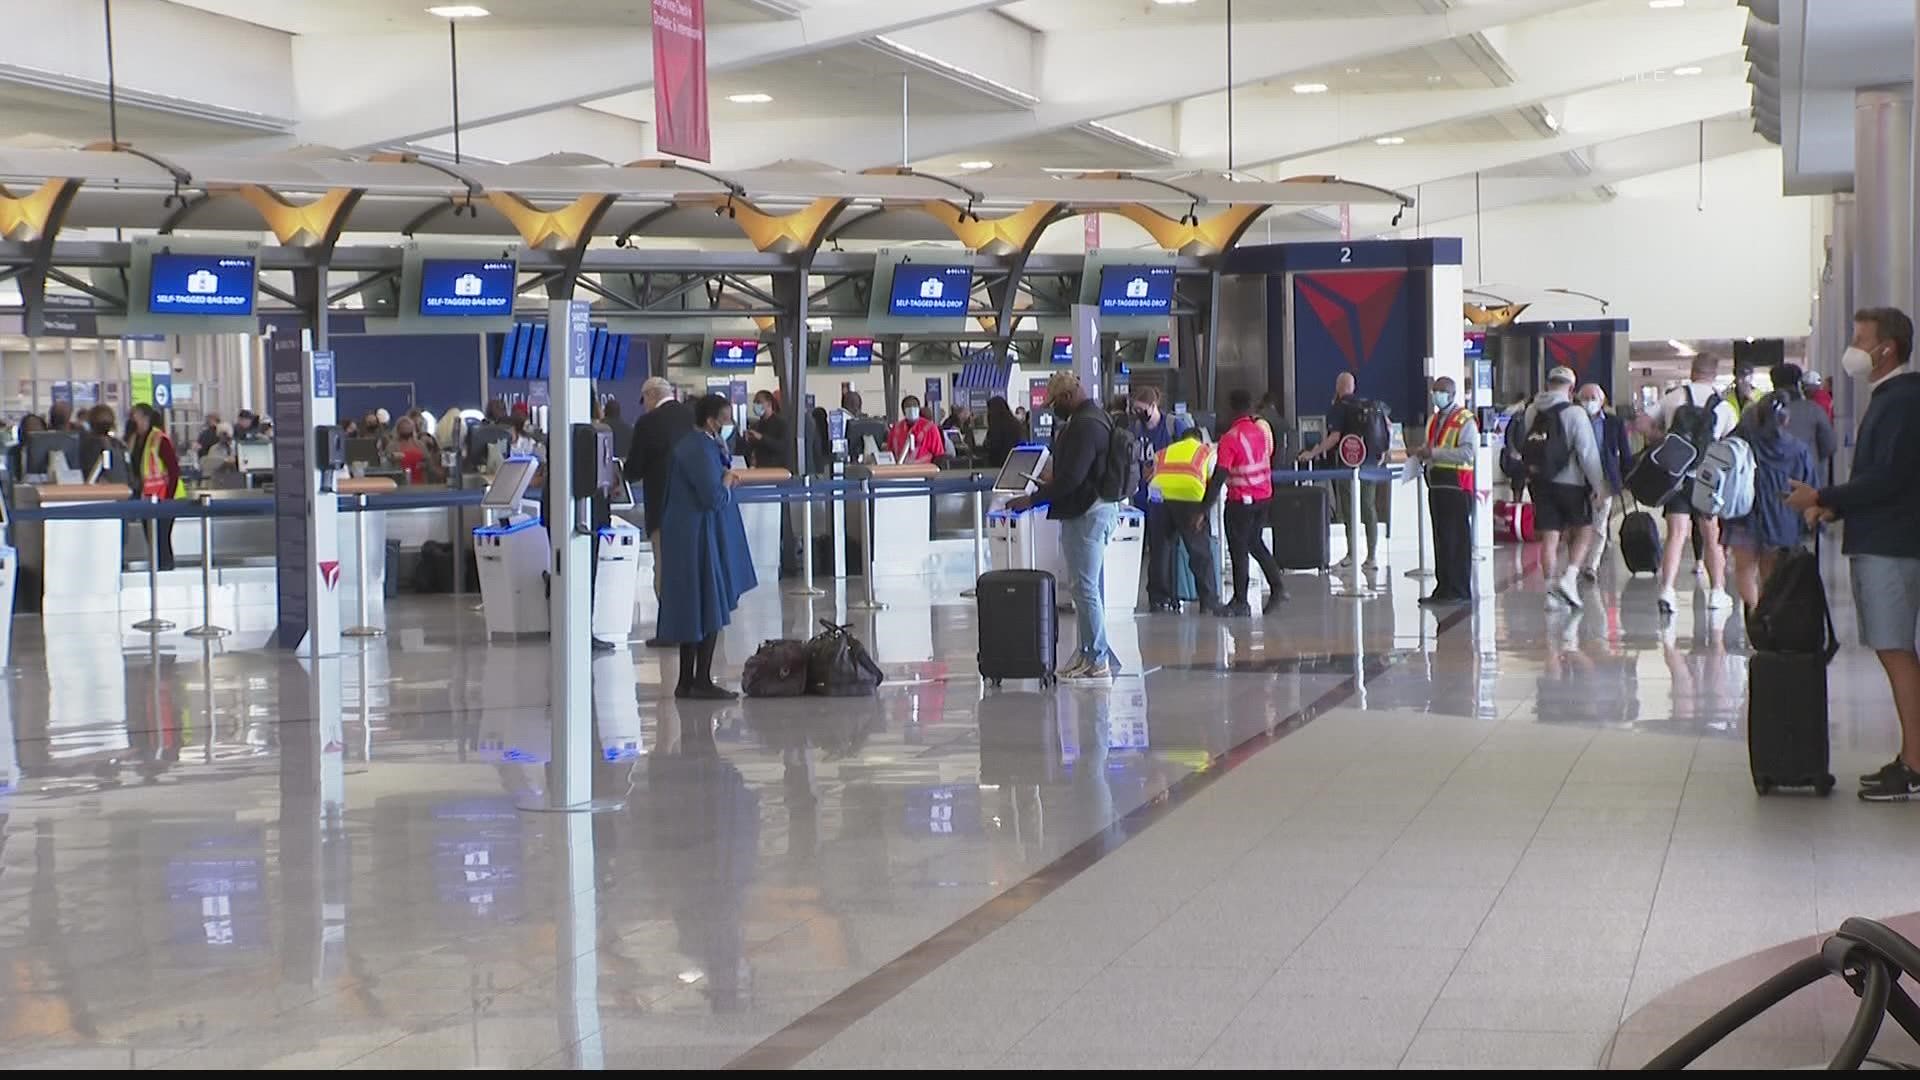 Airport officials expect 5 million passengers this month alone.